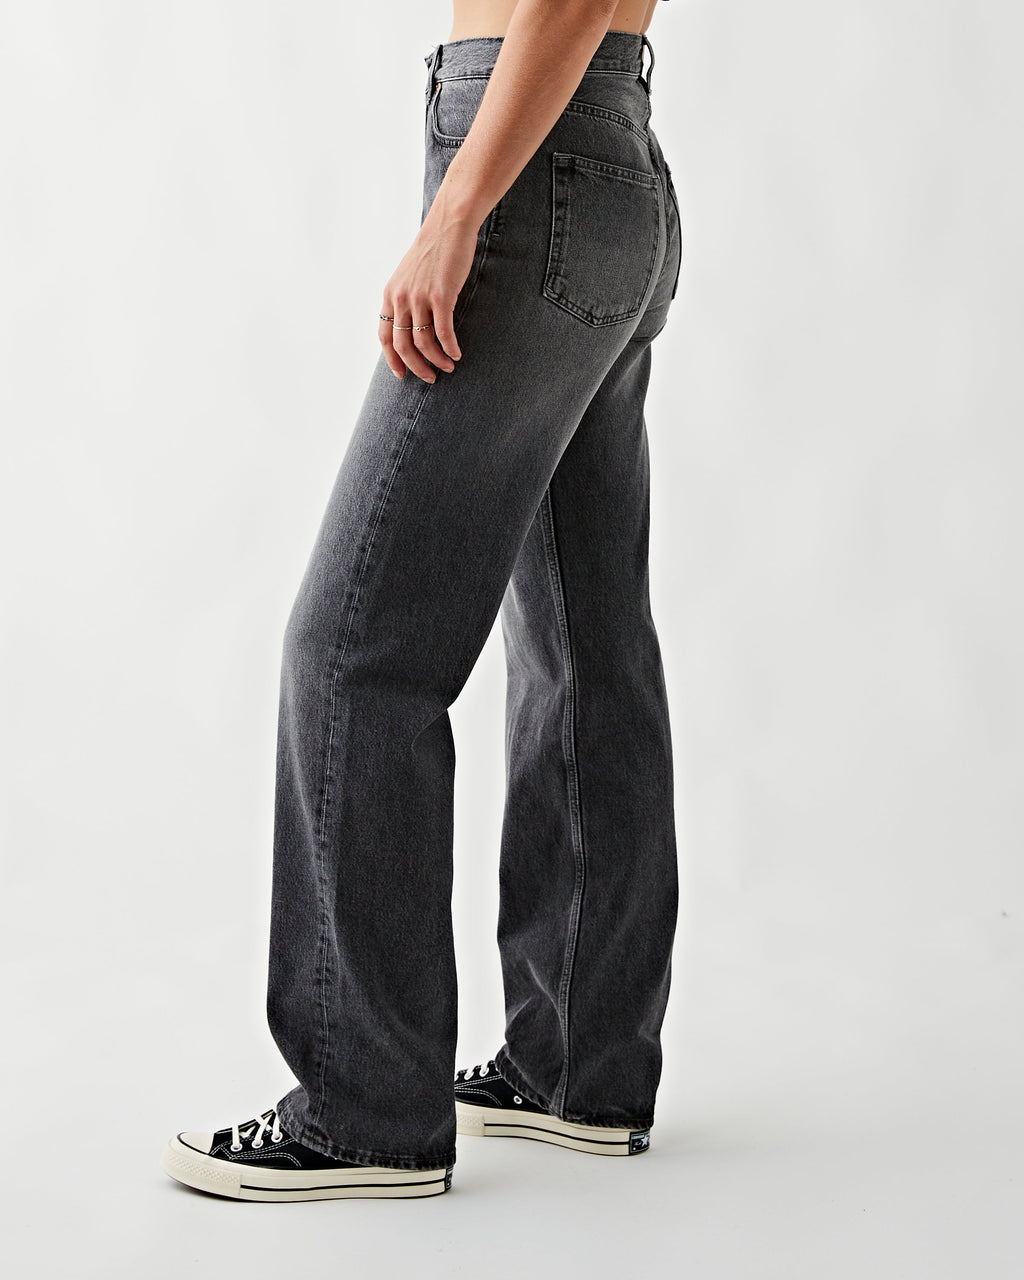 Women's Jeans, Shop Straight Leg Jeans and More